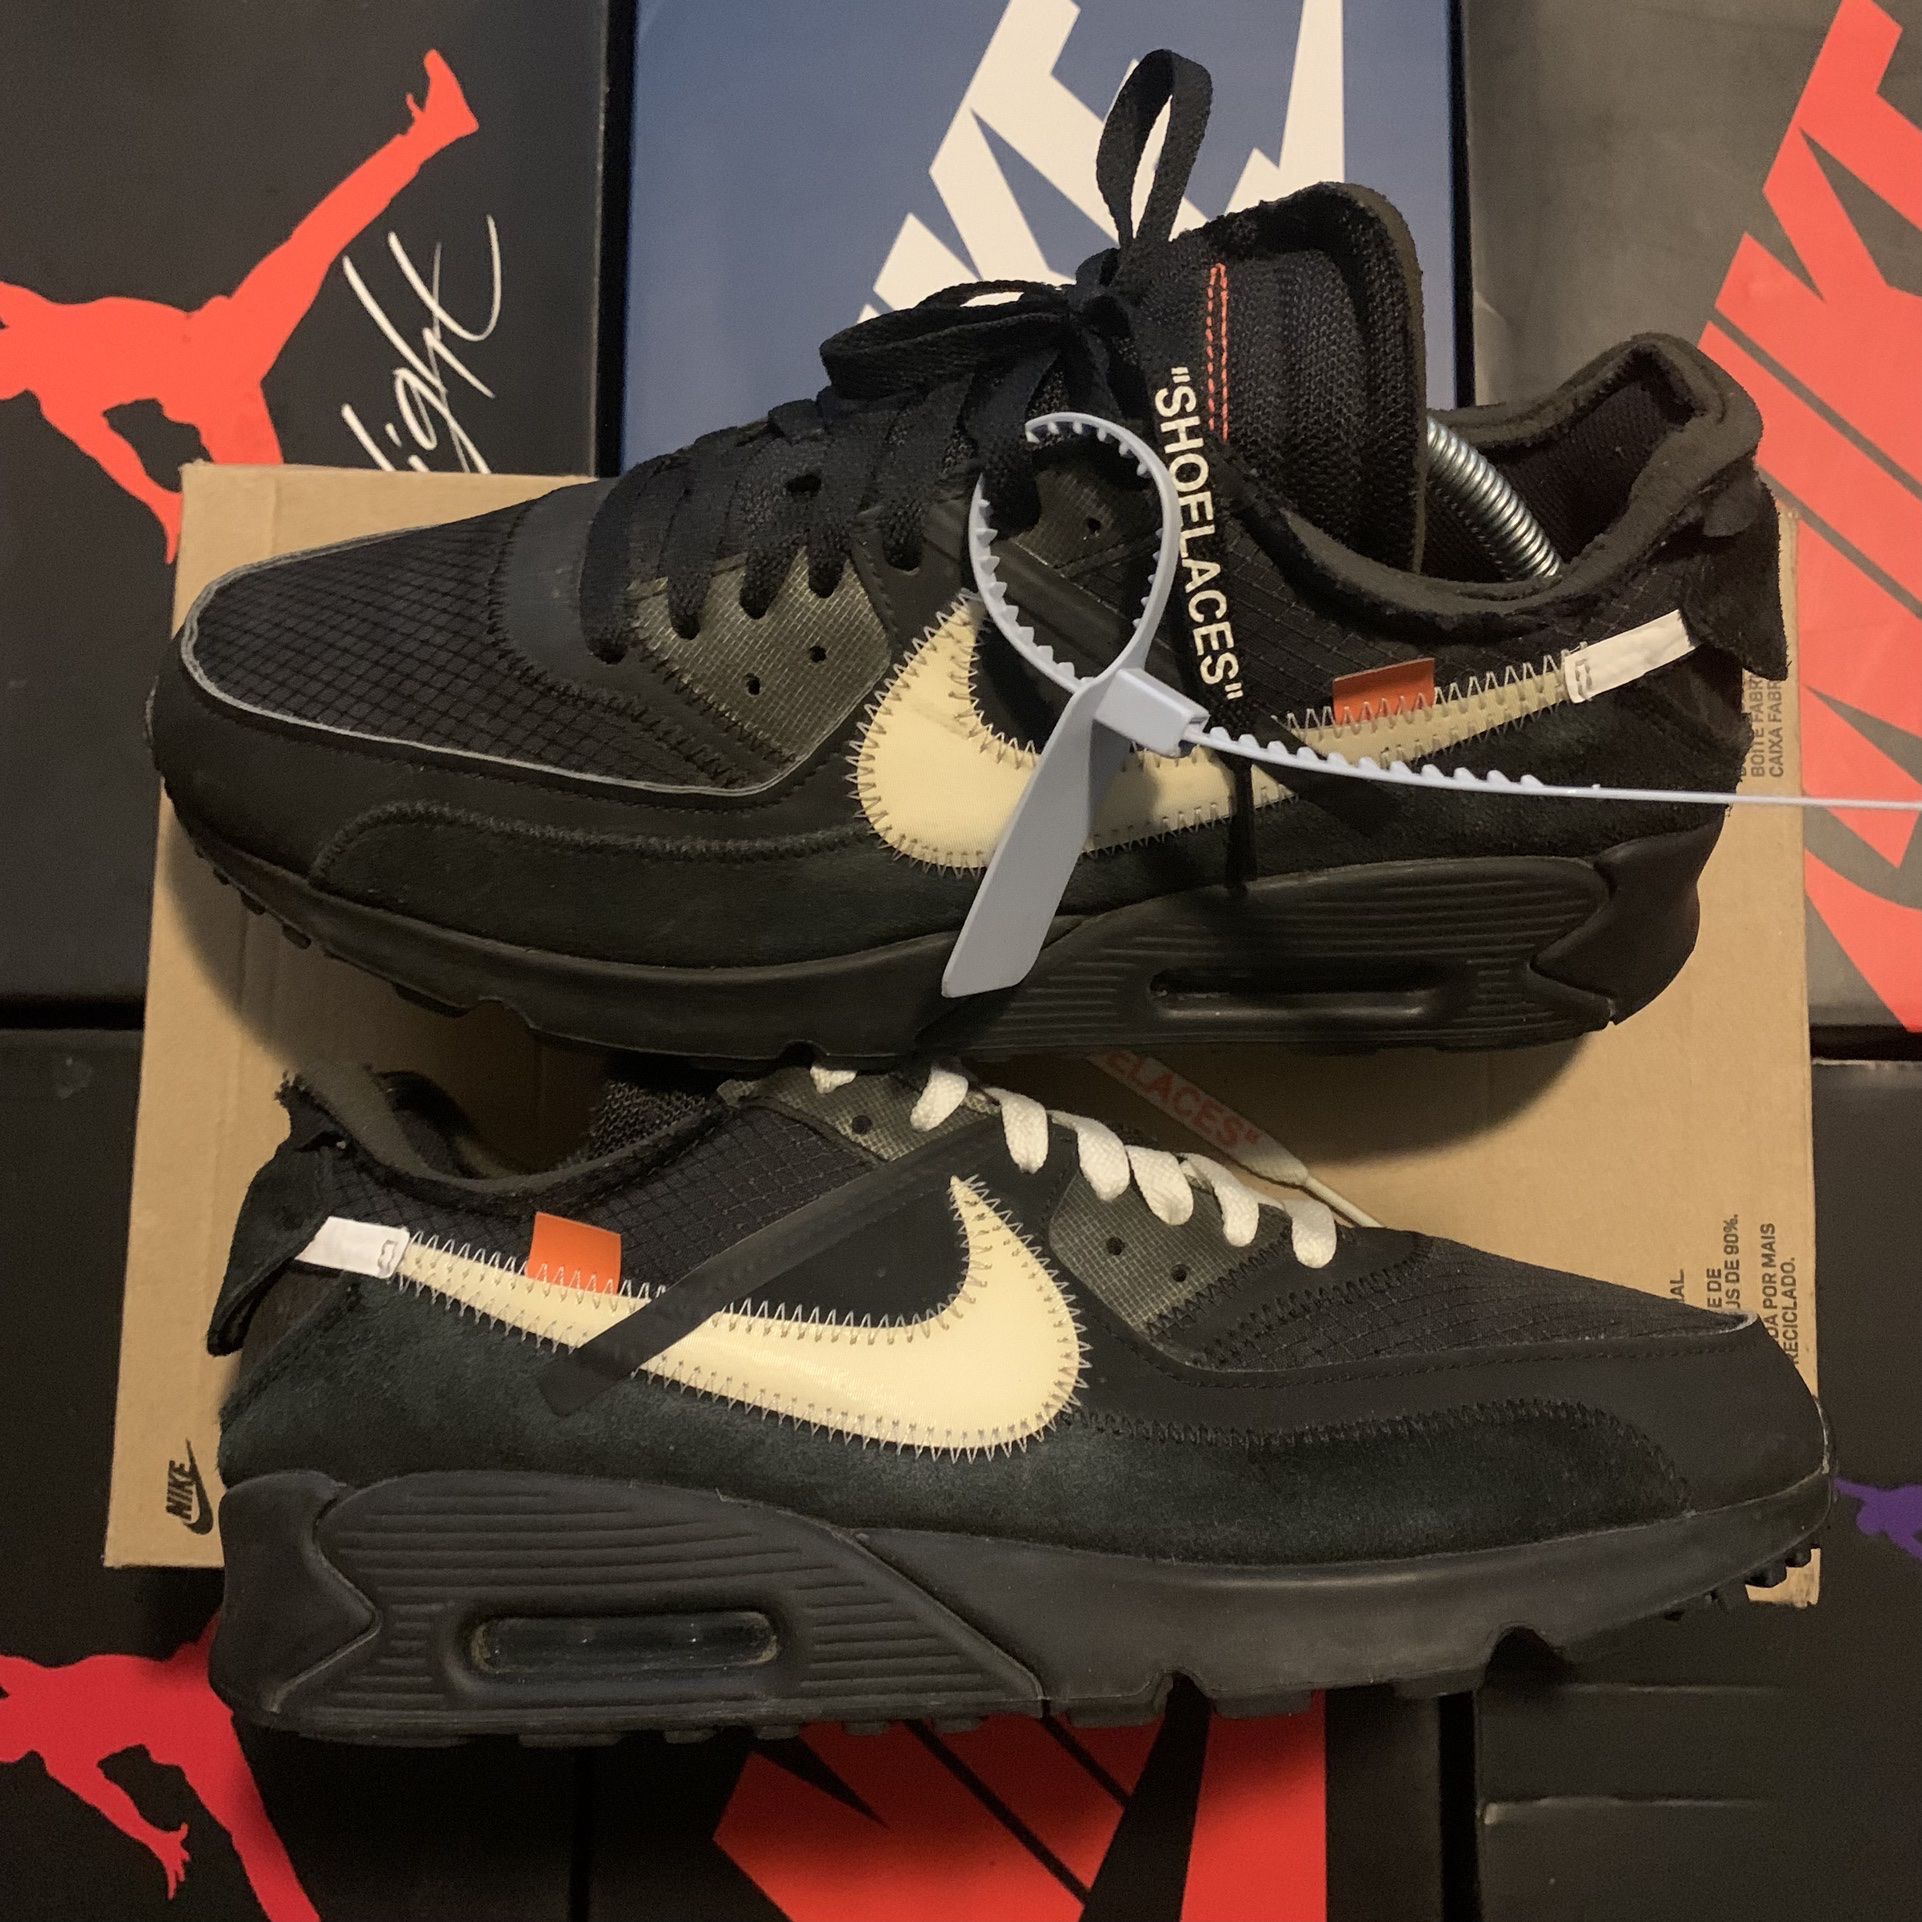 Nike Off White Air Max 90 'Black' for Sale in San Antonio, TX - OfferUp